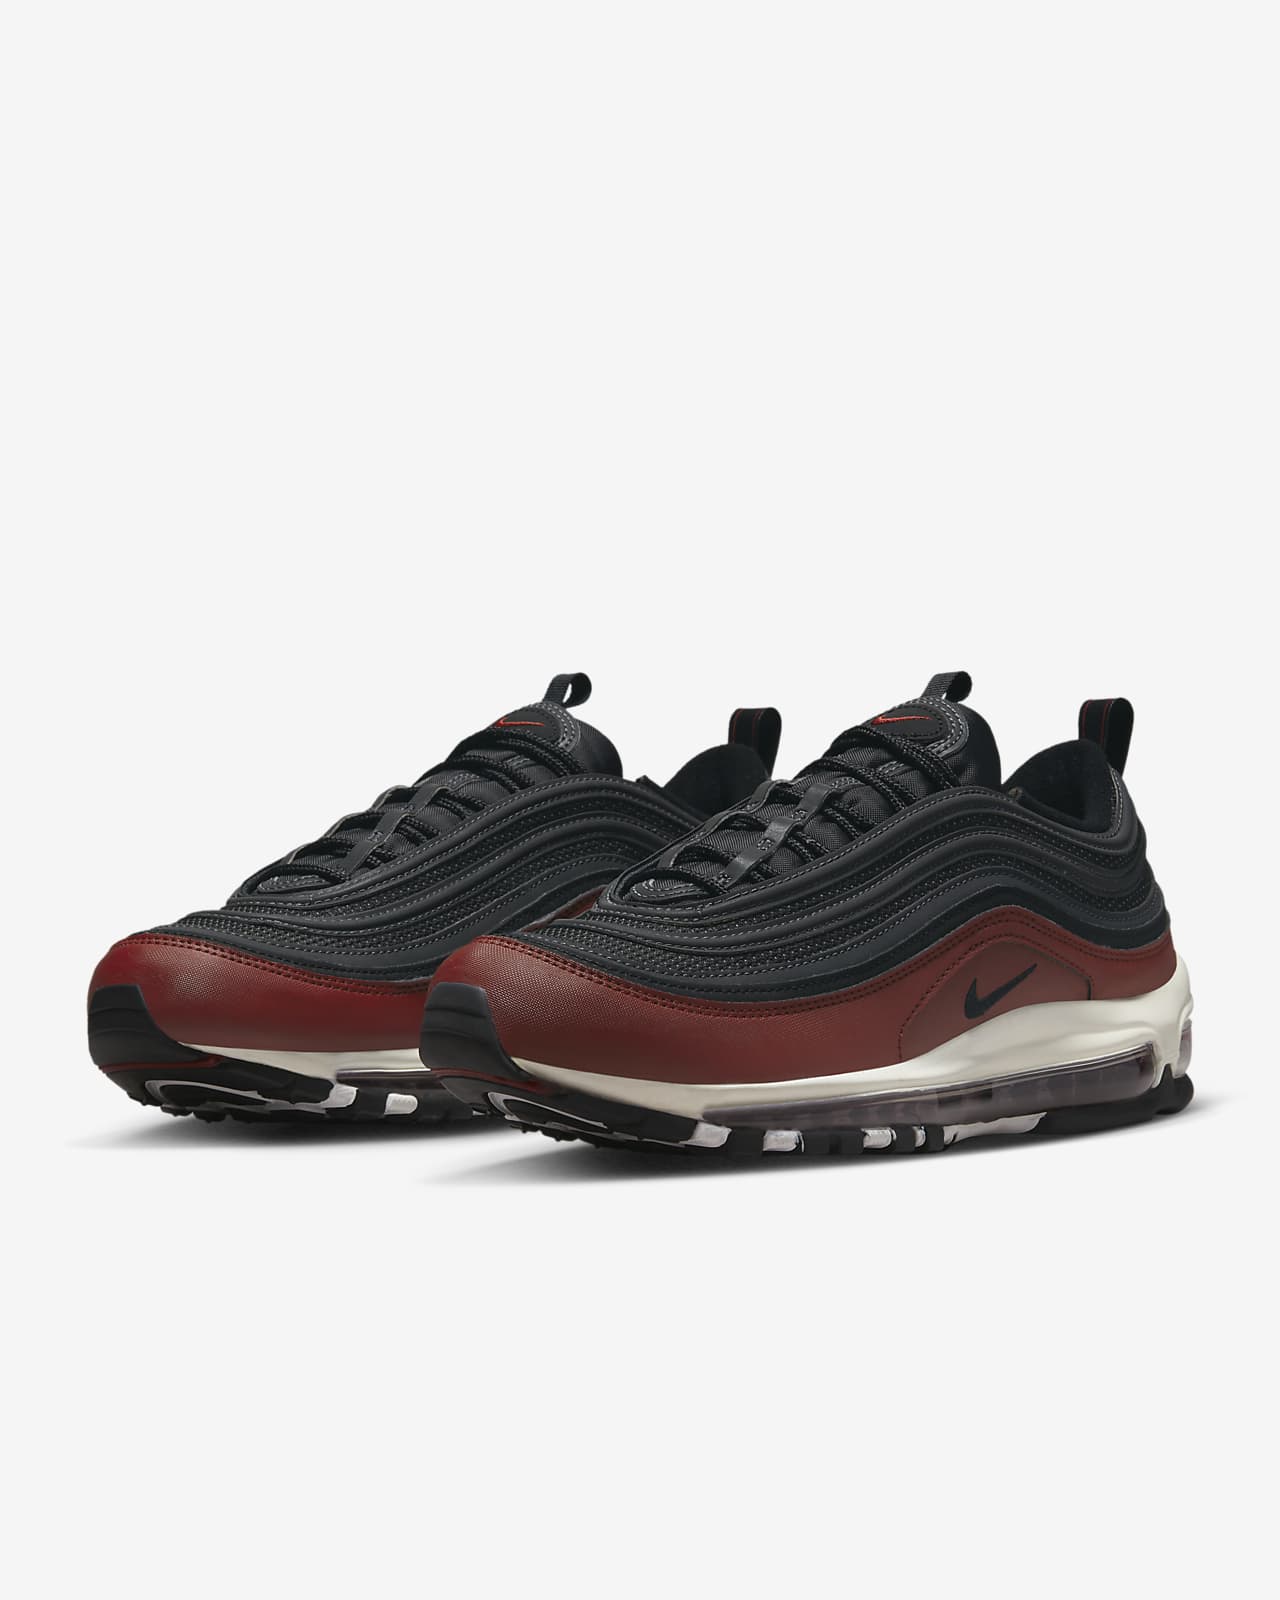 size 14 men's nike air max 97 shoes